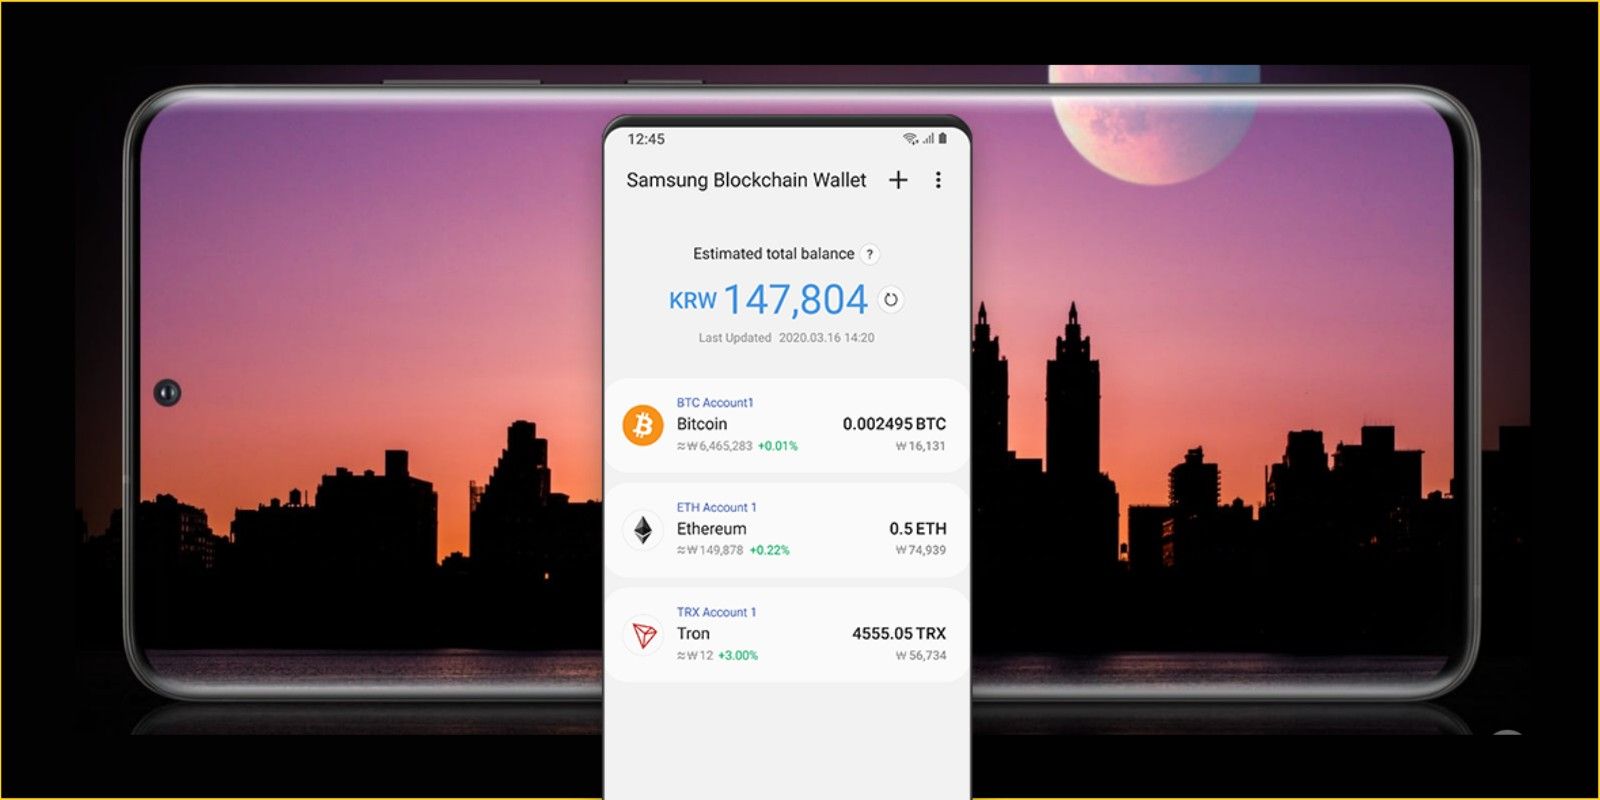 How to Use Samsung Smartphones to Buy & Sell Cryptocurrencies